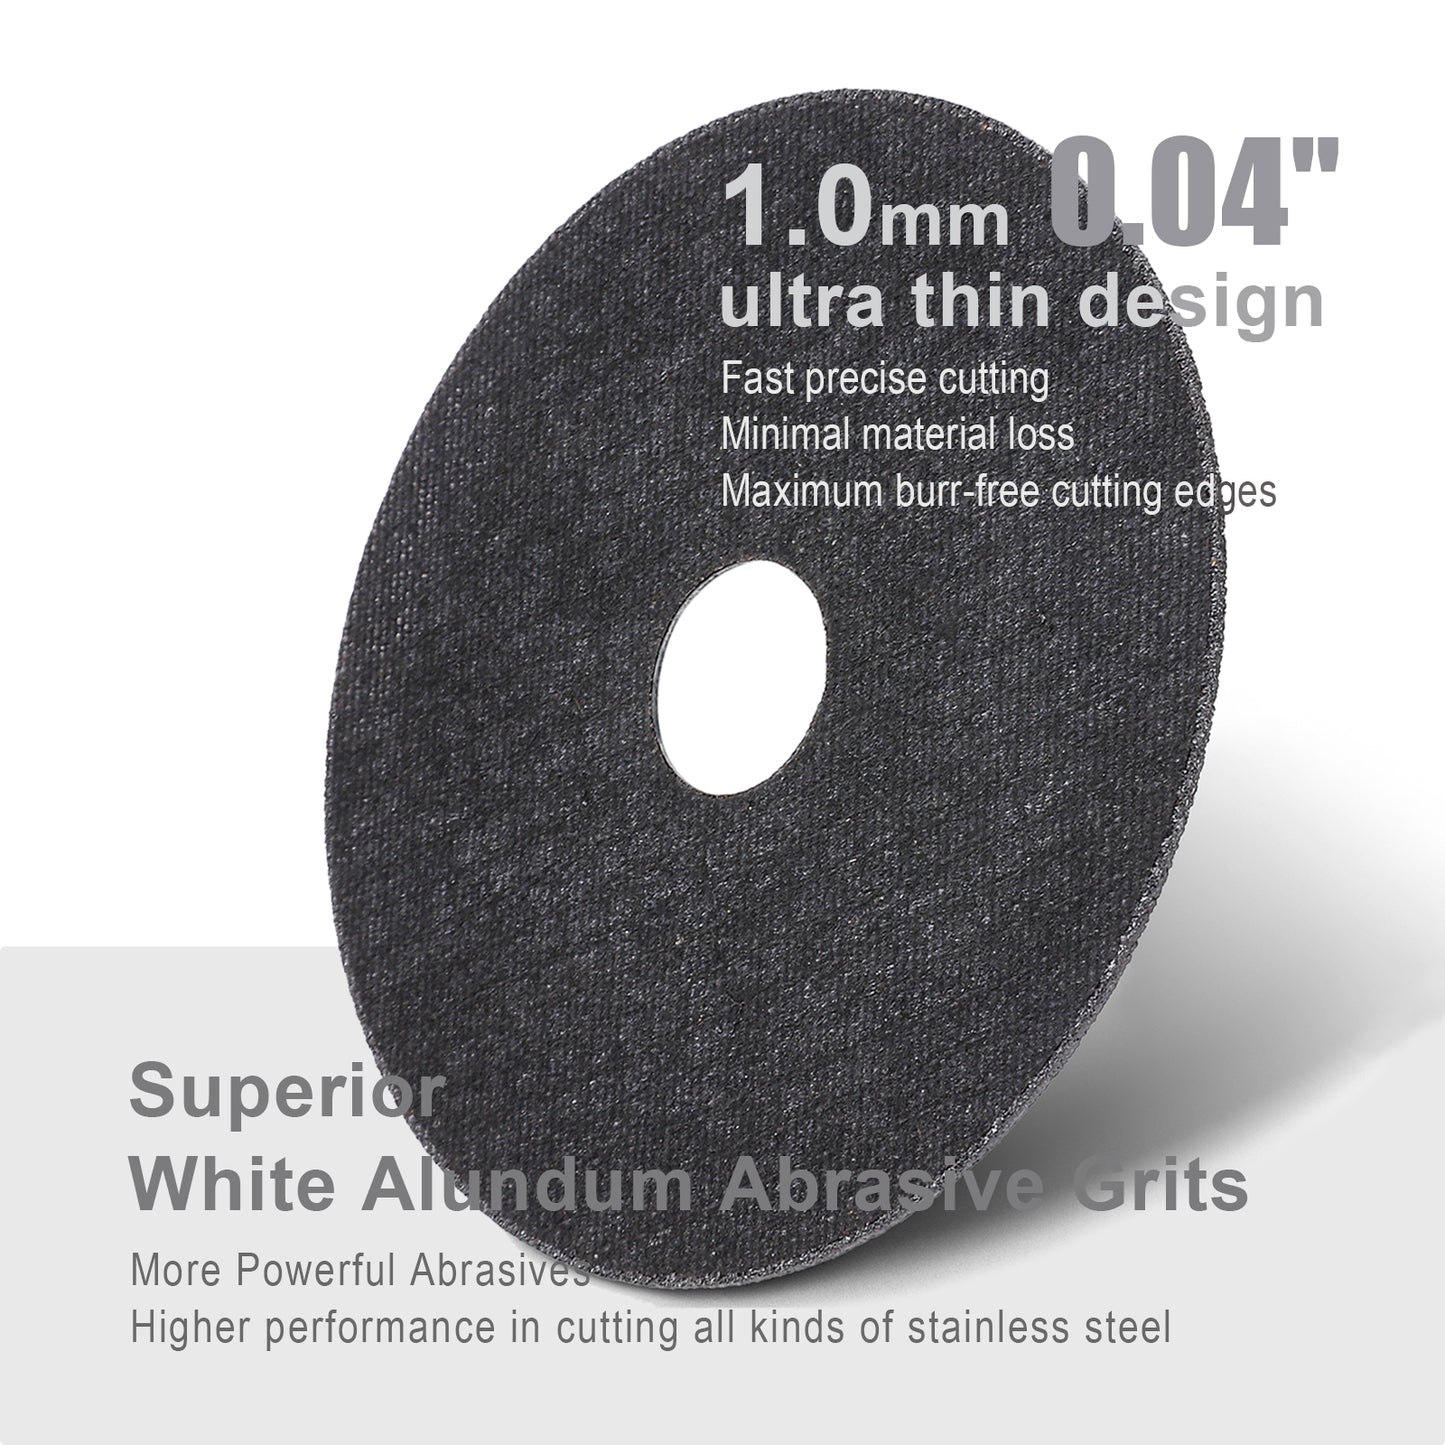 Cut Off Wheels Optimized for Cutting Stainless Steel and Other High Tensile Metals, 4" x .040" x 5/8" - 50 Pack